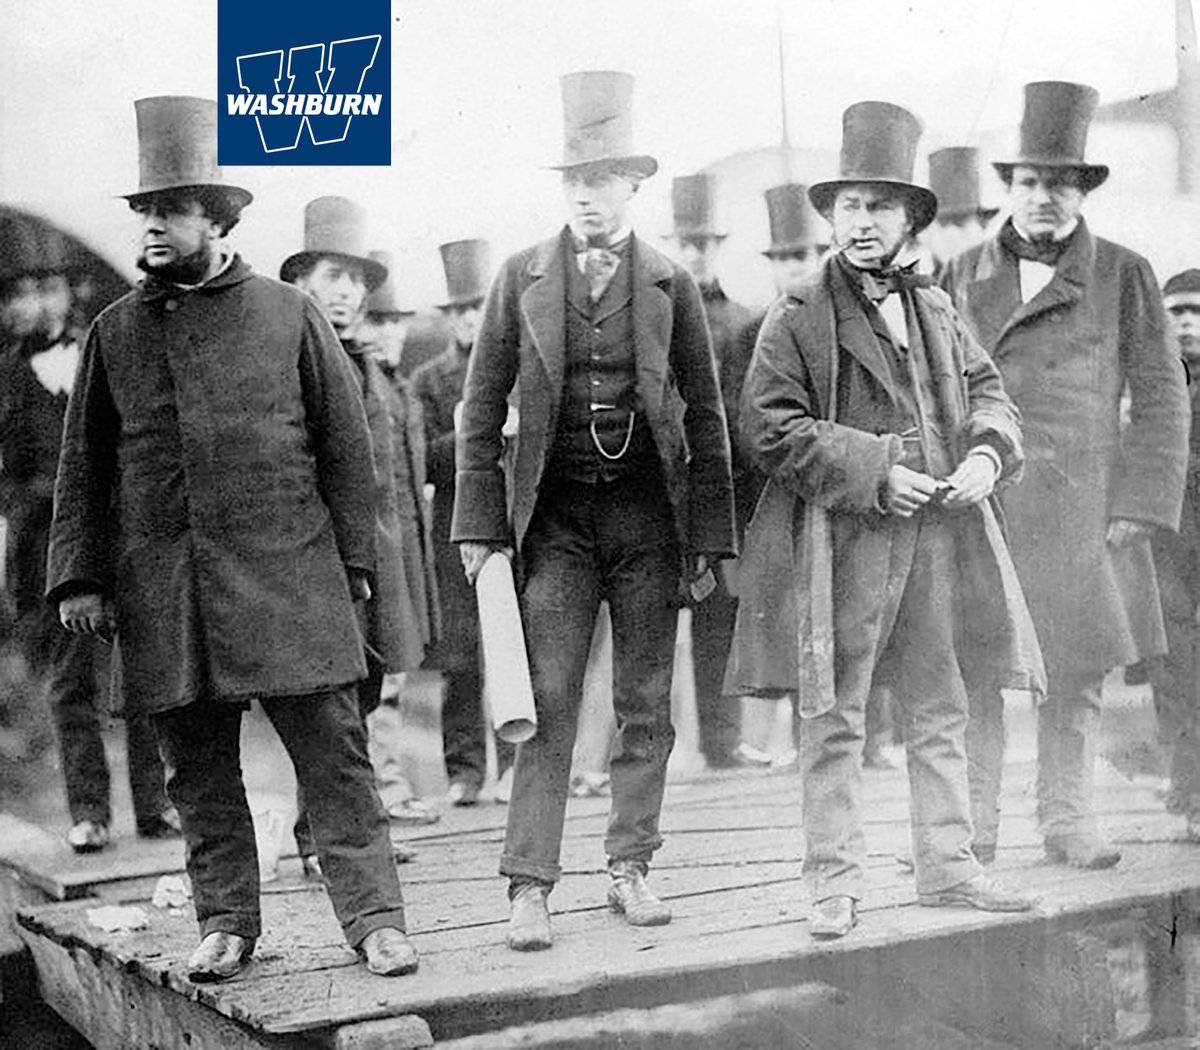 And this is a historic photo of Ichabods...  courageous, kind, scholarly individuals. 

Happy #NatitonalMascotDay, Bods!